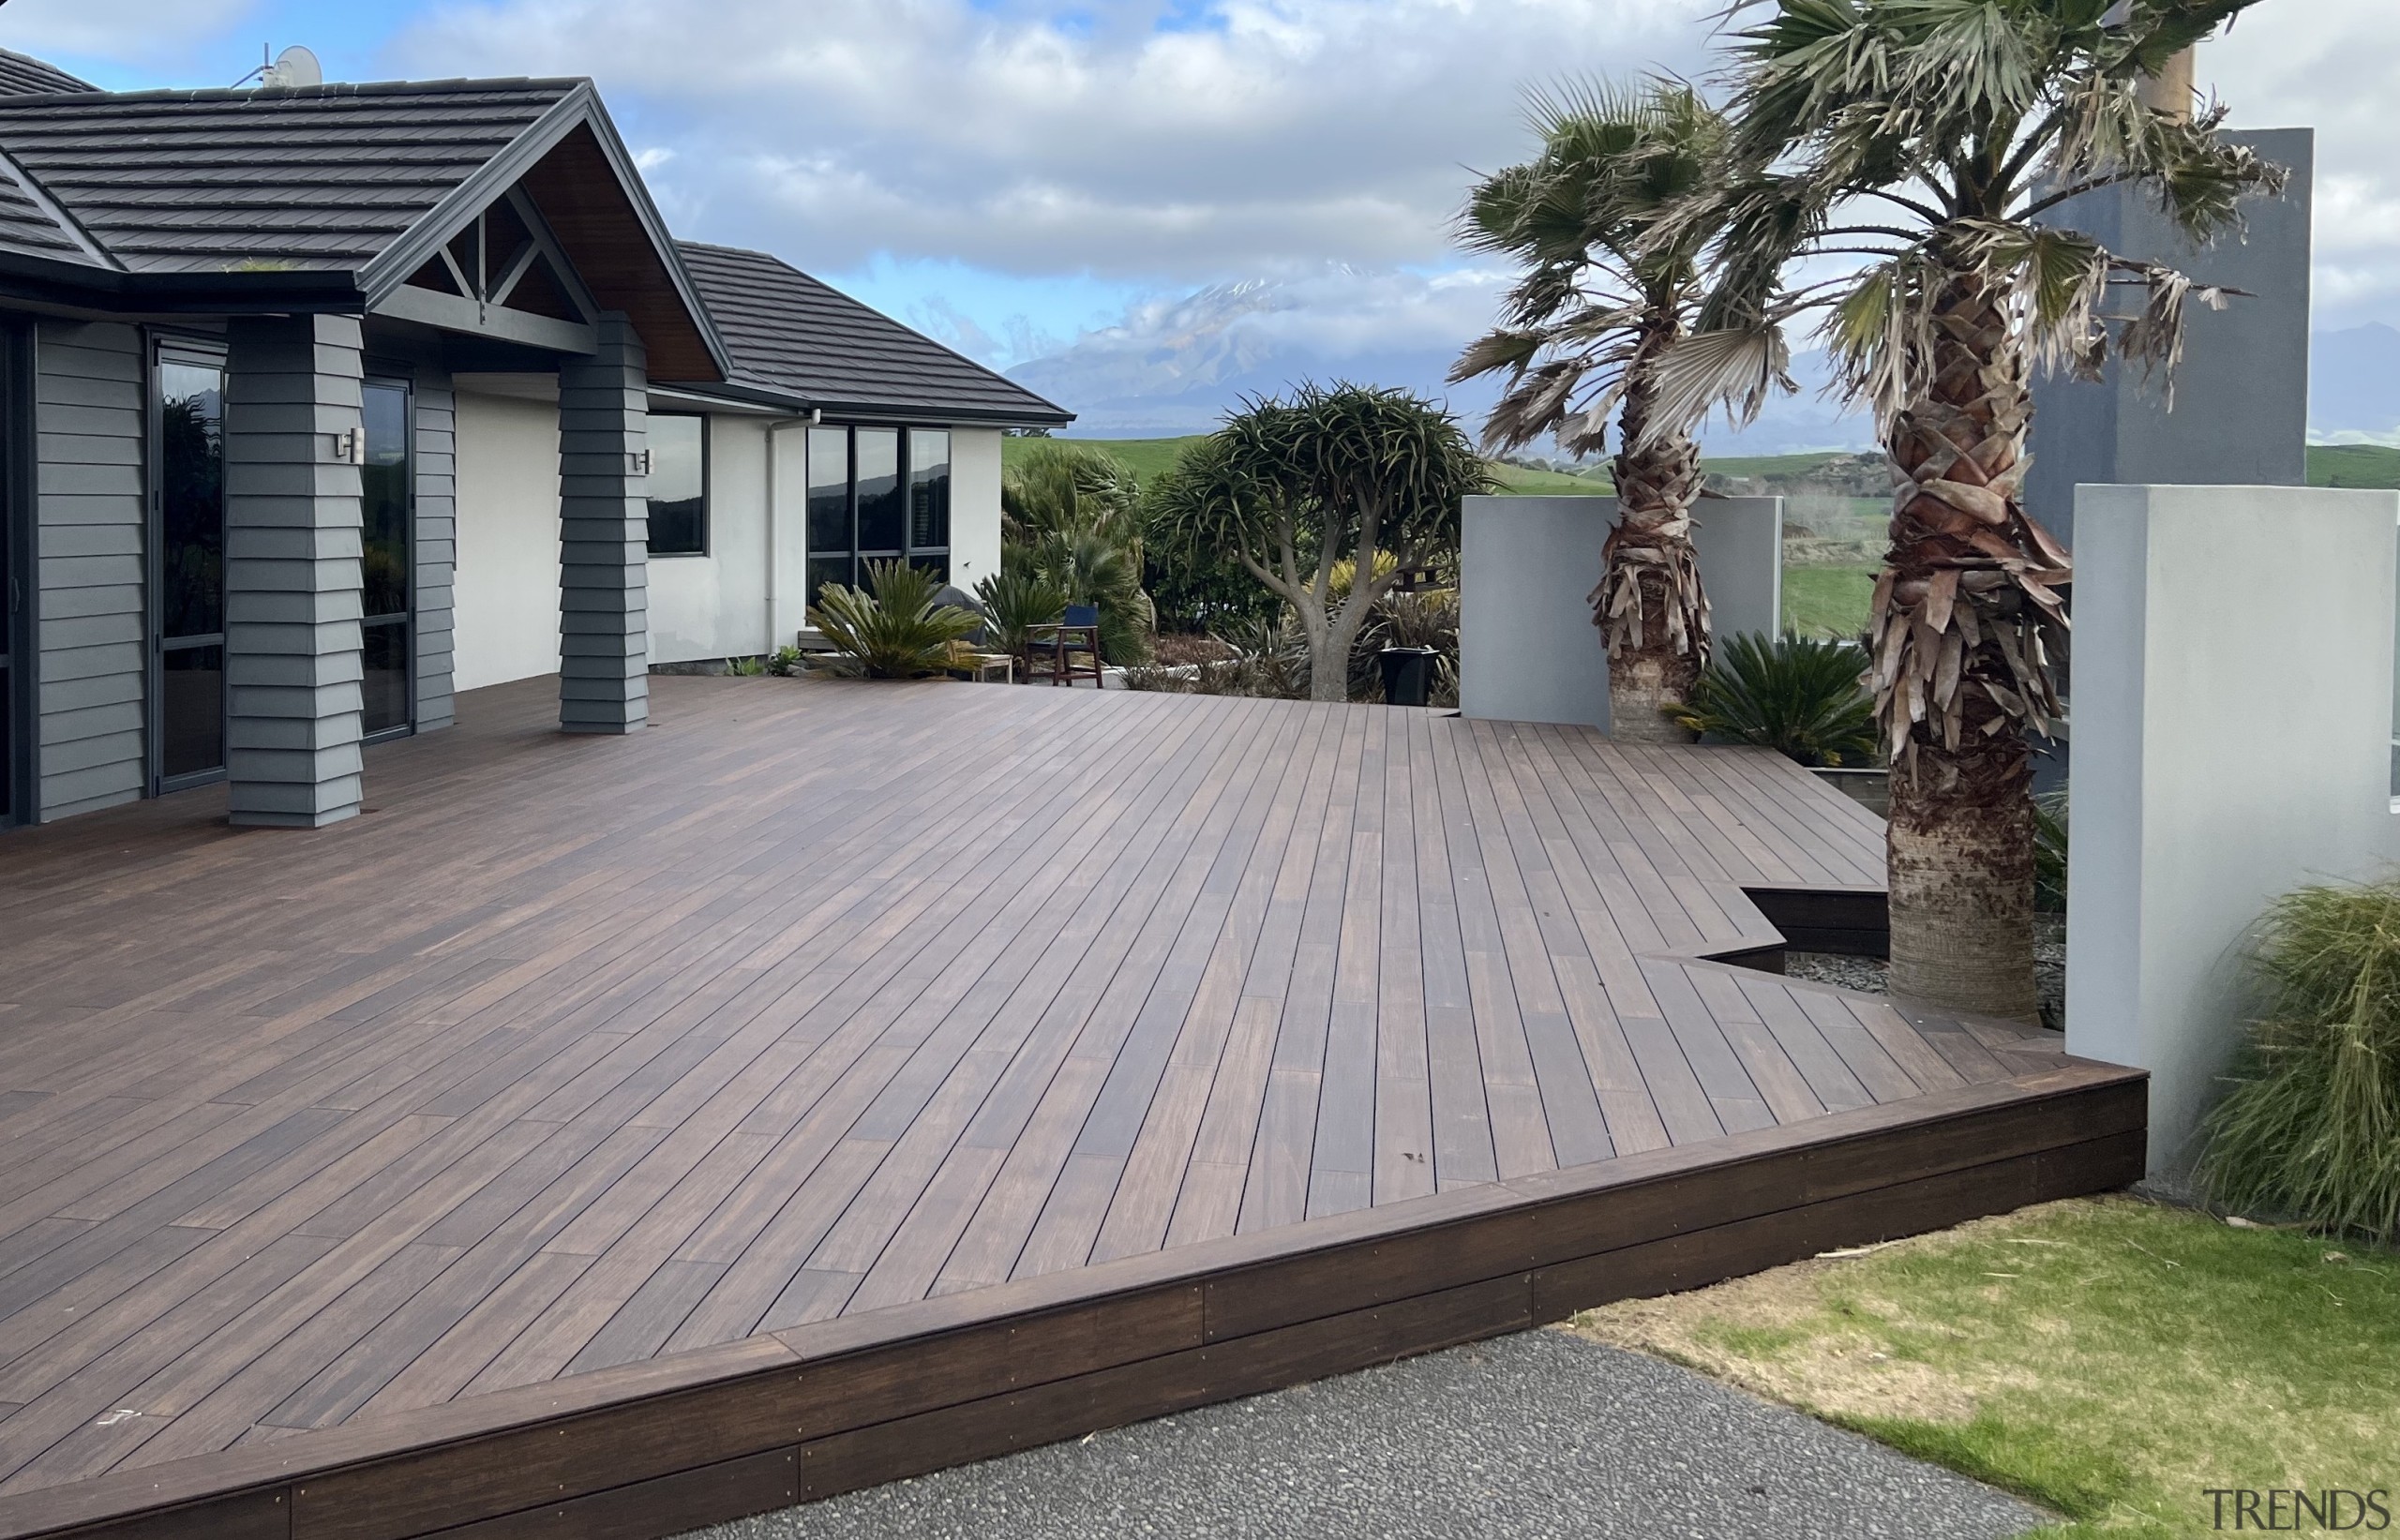 Bamboo X-treme decking is exceptionally hard, dense and 